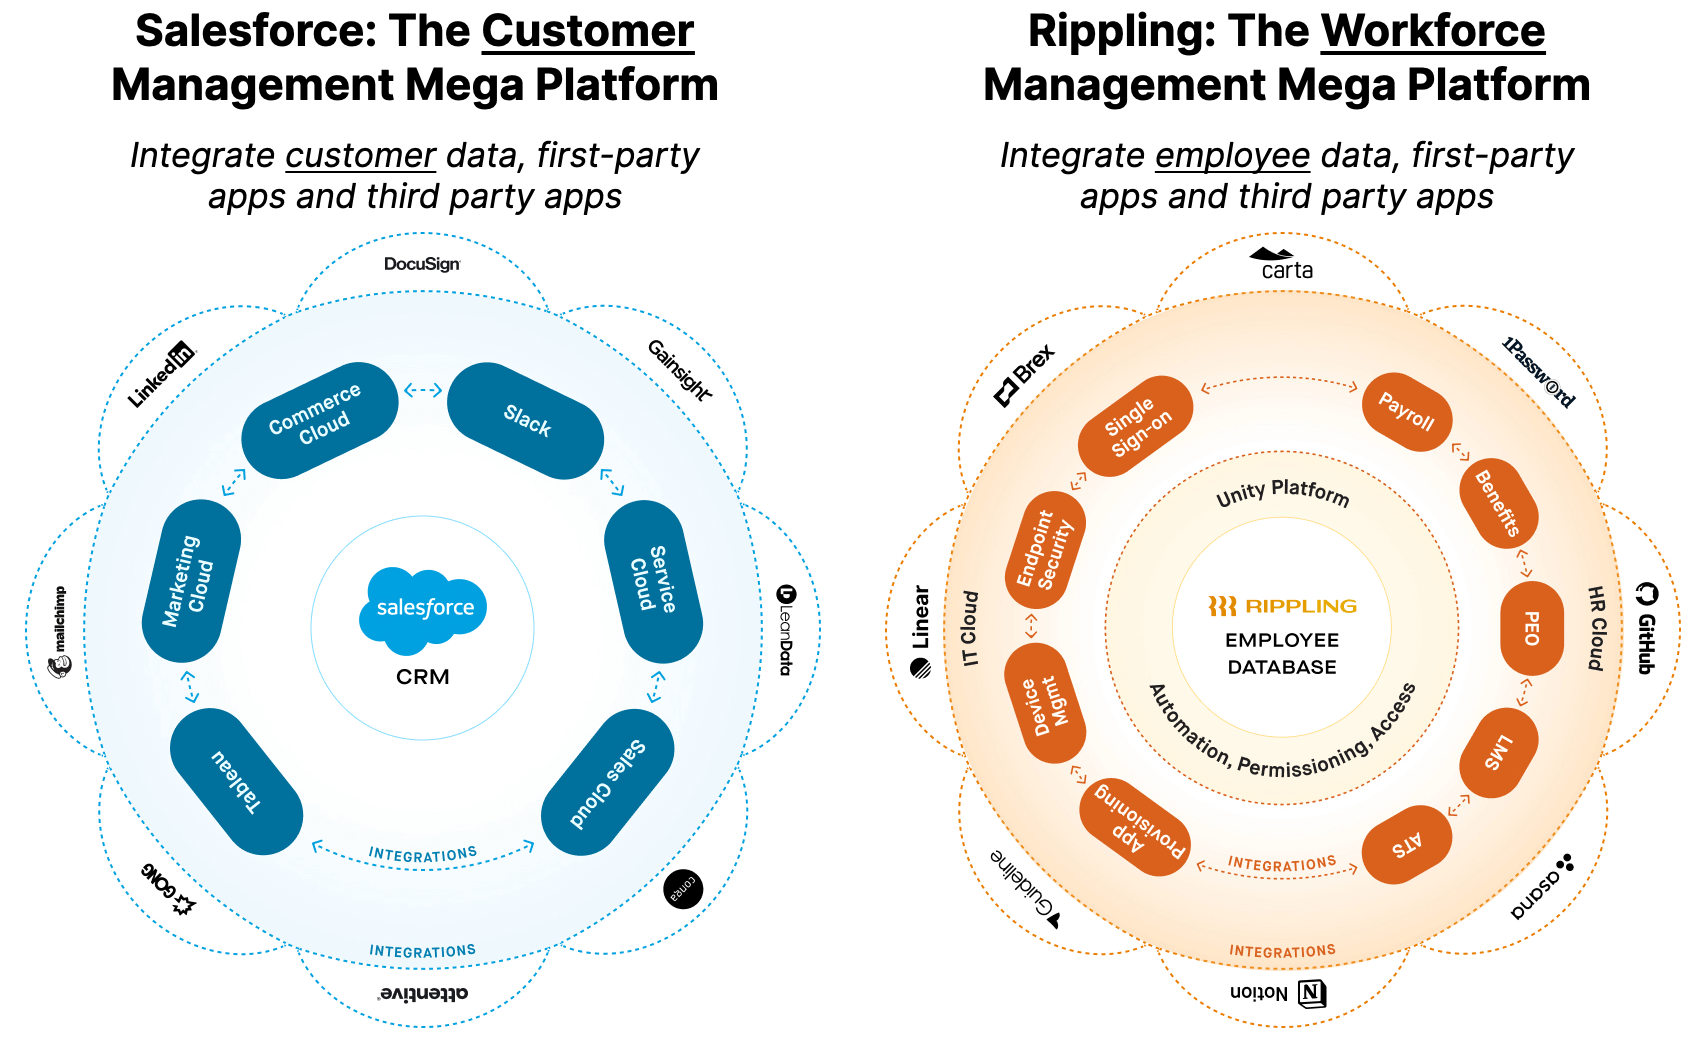 Comparison of Salesforce and Rippling.